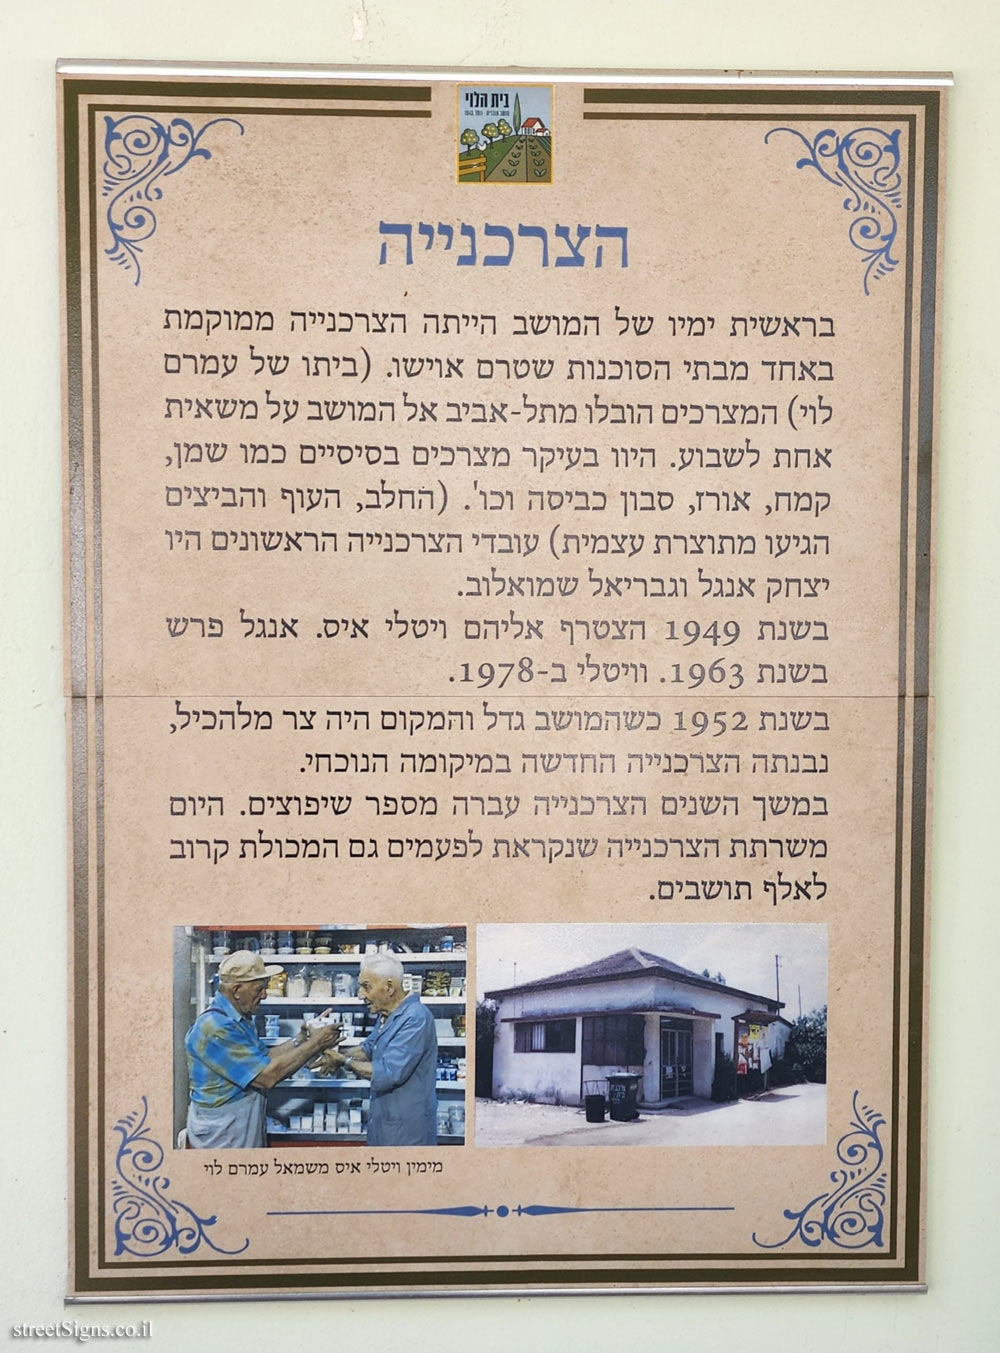 Beit HaLevi - The Grocery store